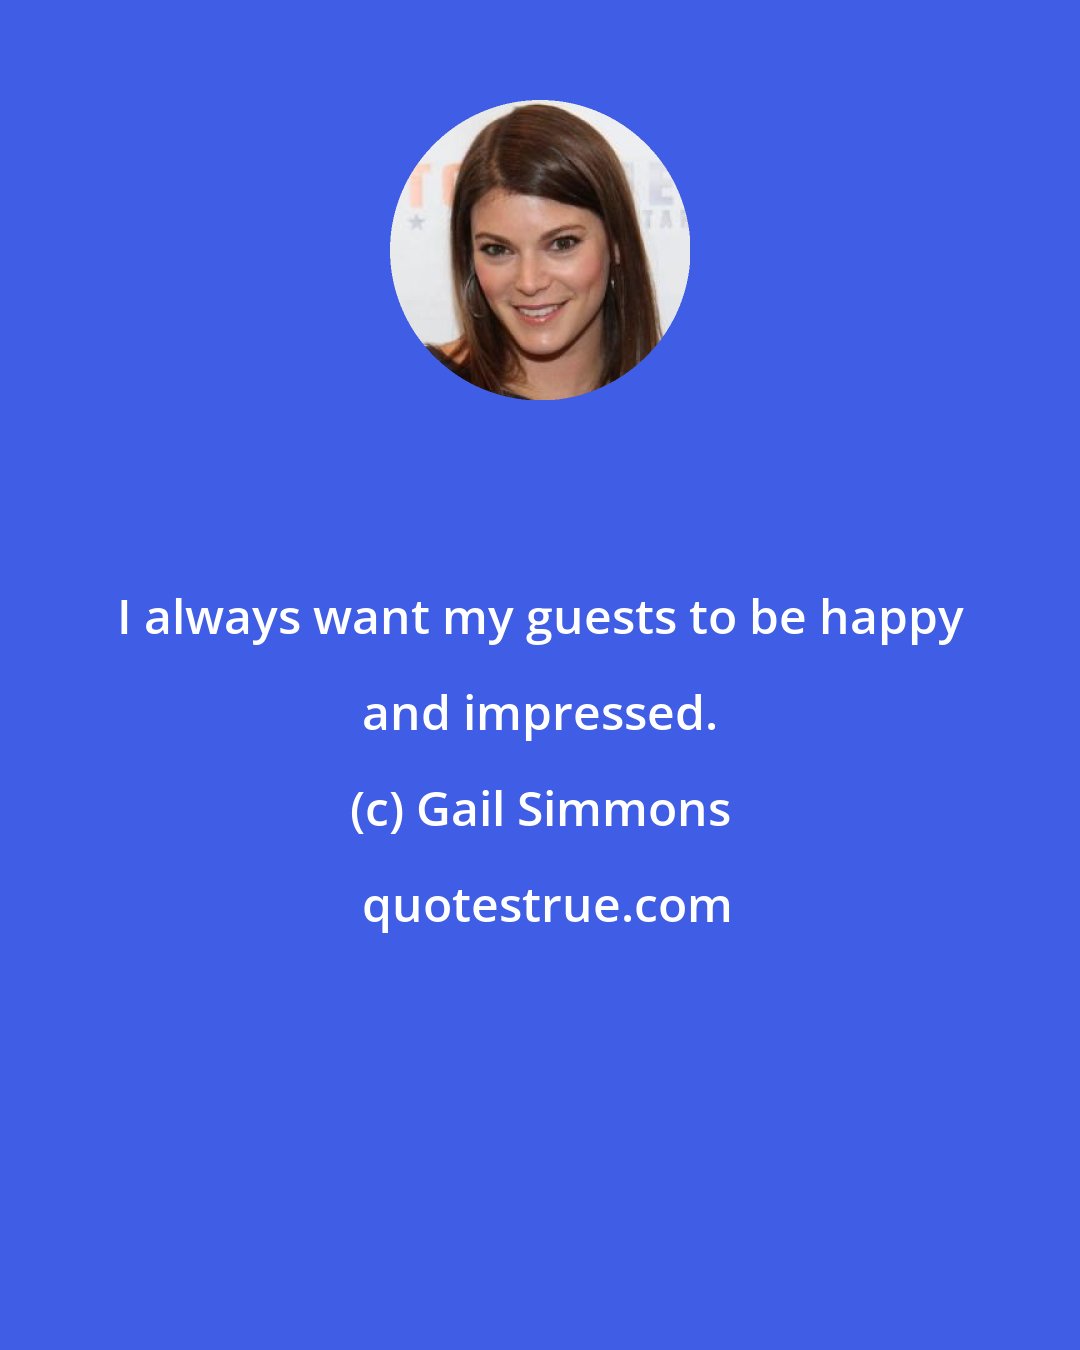 Gail Simmons: I always want my guests to be happy and impressed.